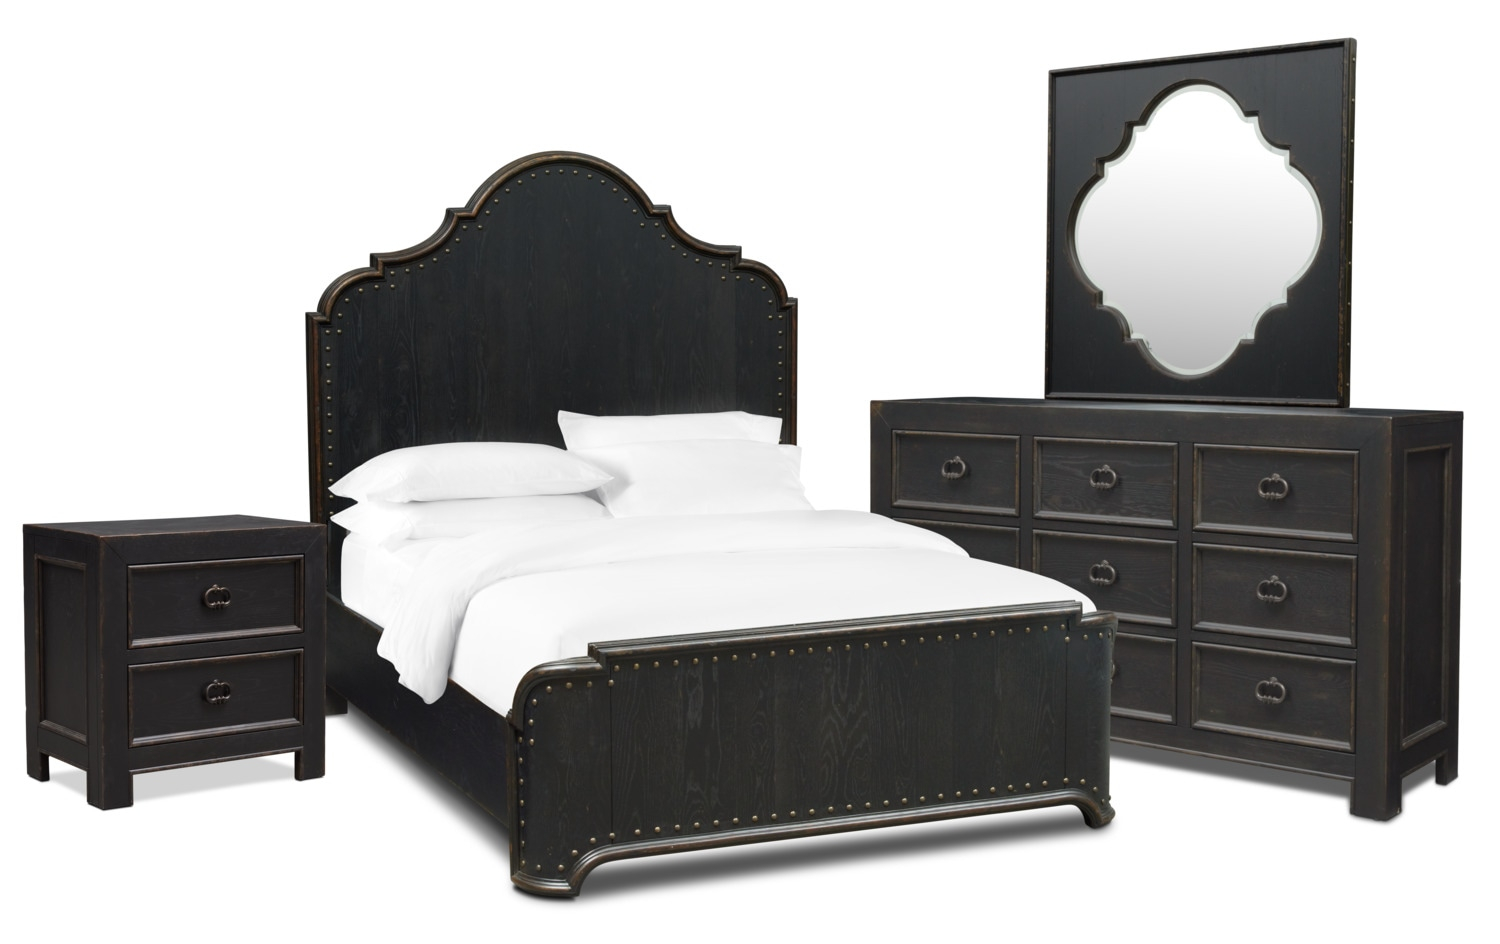 Lennon 6 Piece Bedroom Set With Nightstand Dresser And Mirror within sizing 1500 X 944